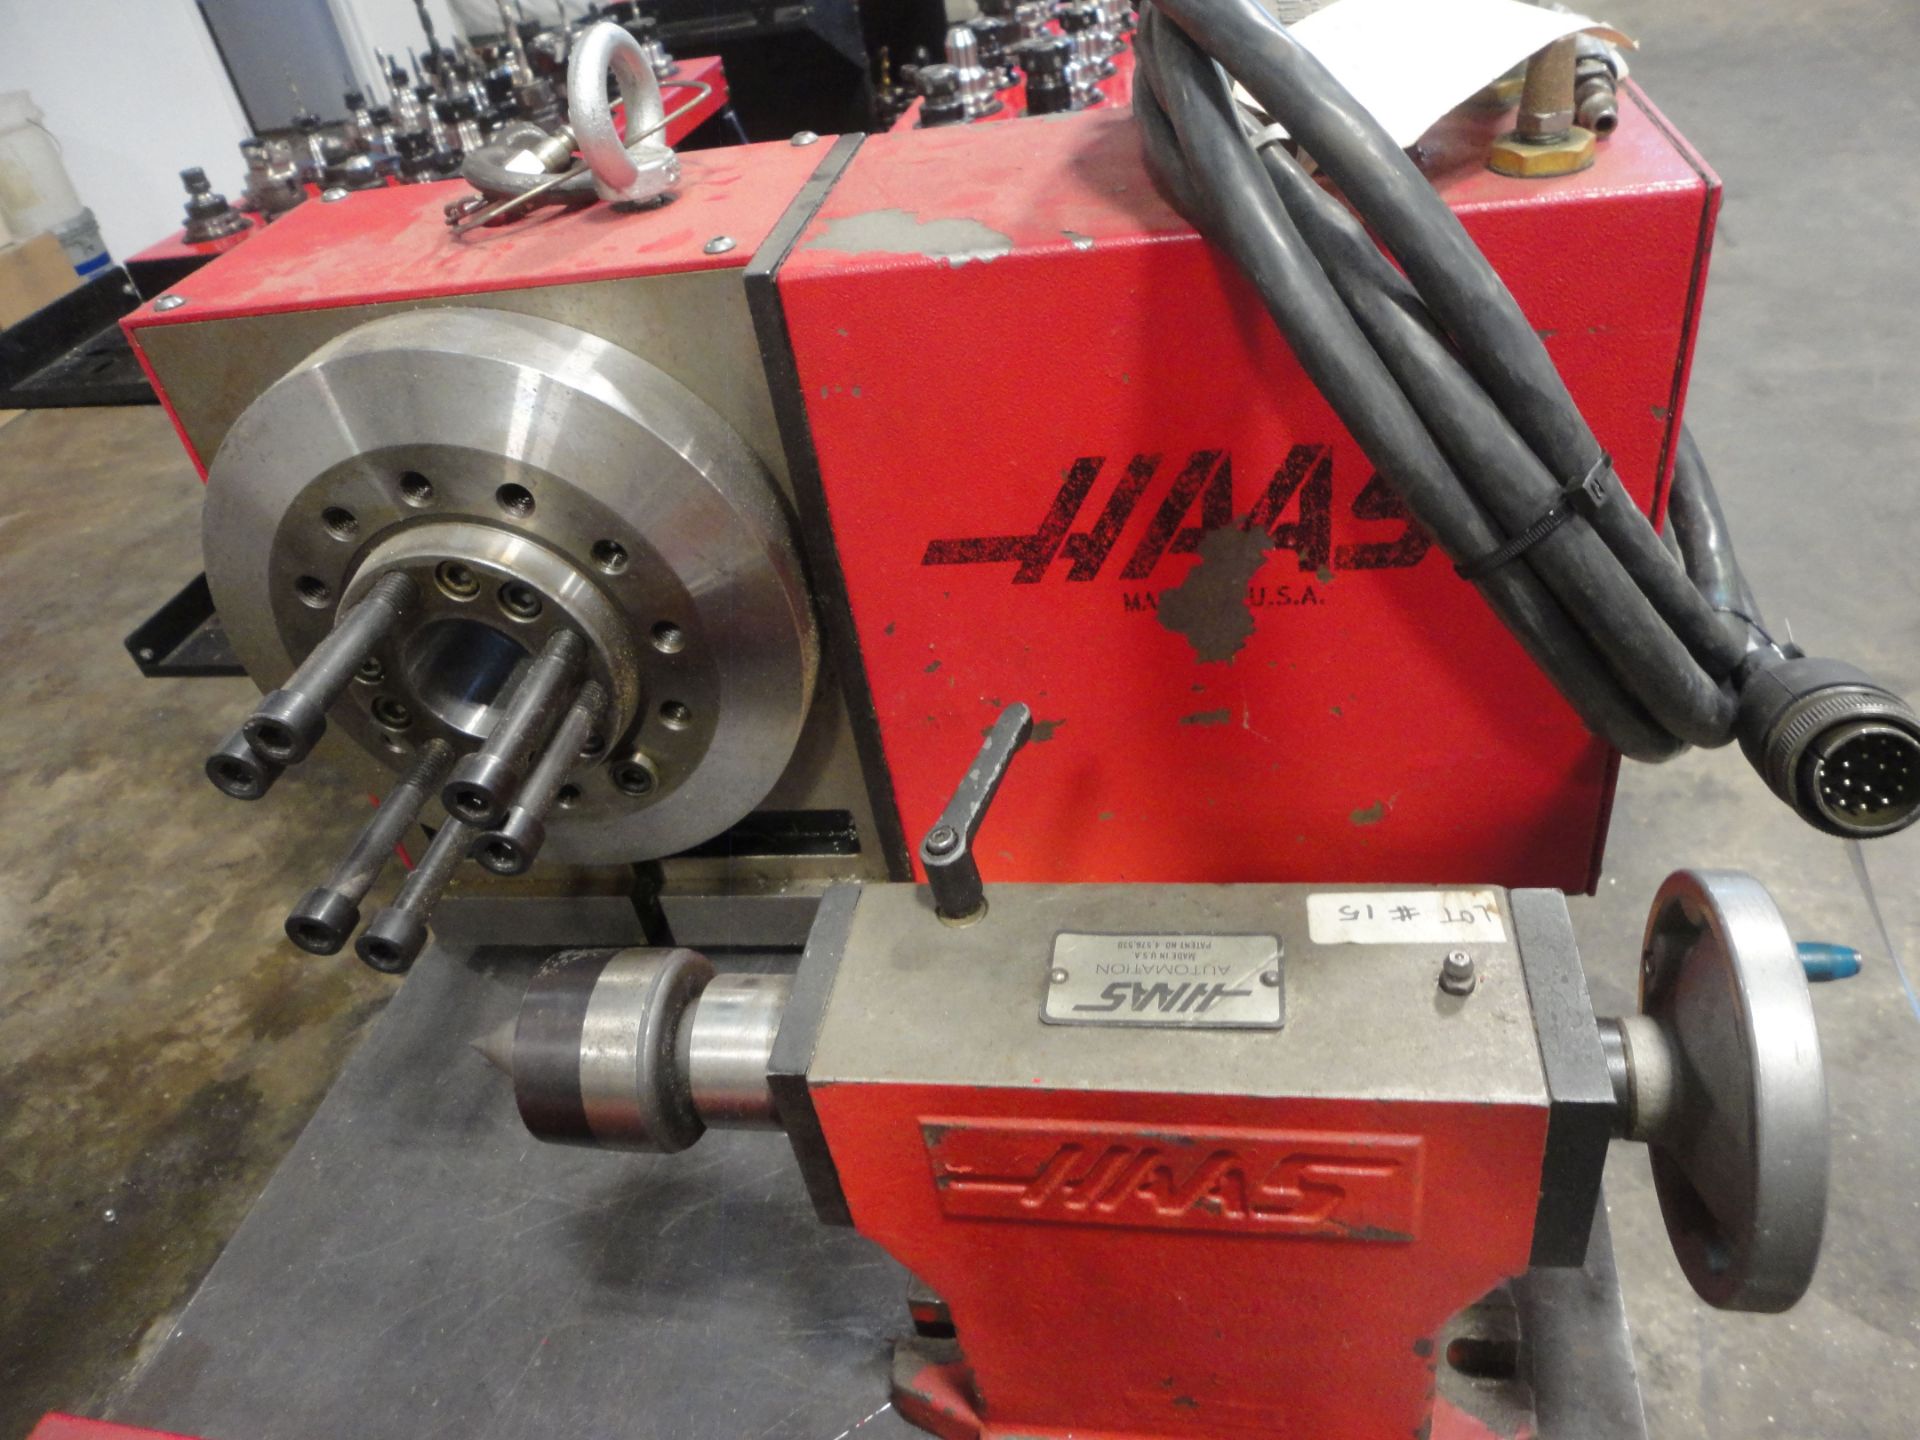 HAAS 4TH AXIS WITH TAILSTOCK AND SERVO CONTROL; S/N 216013 - Image 2 of 3